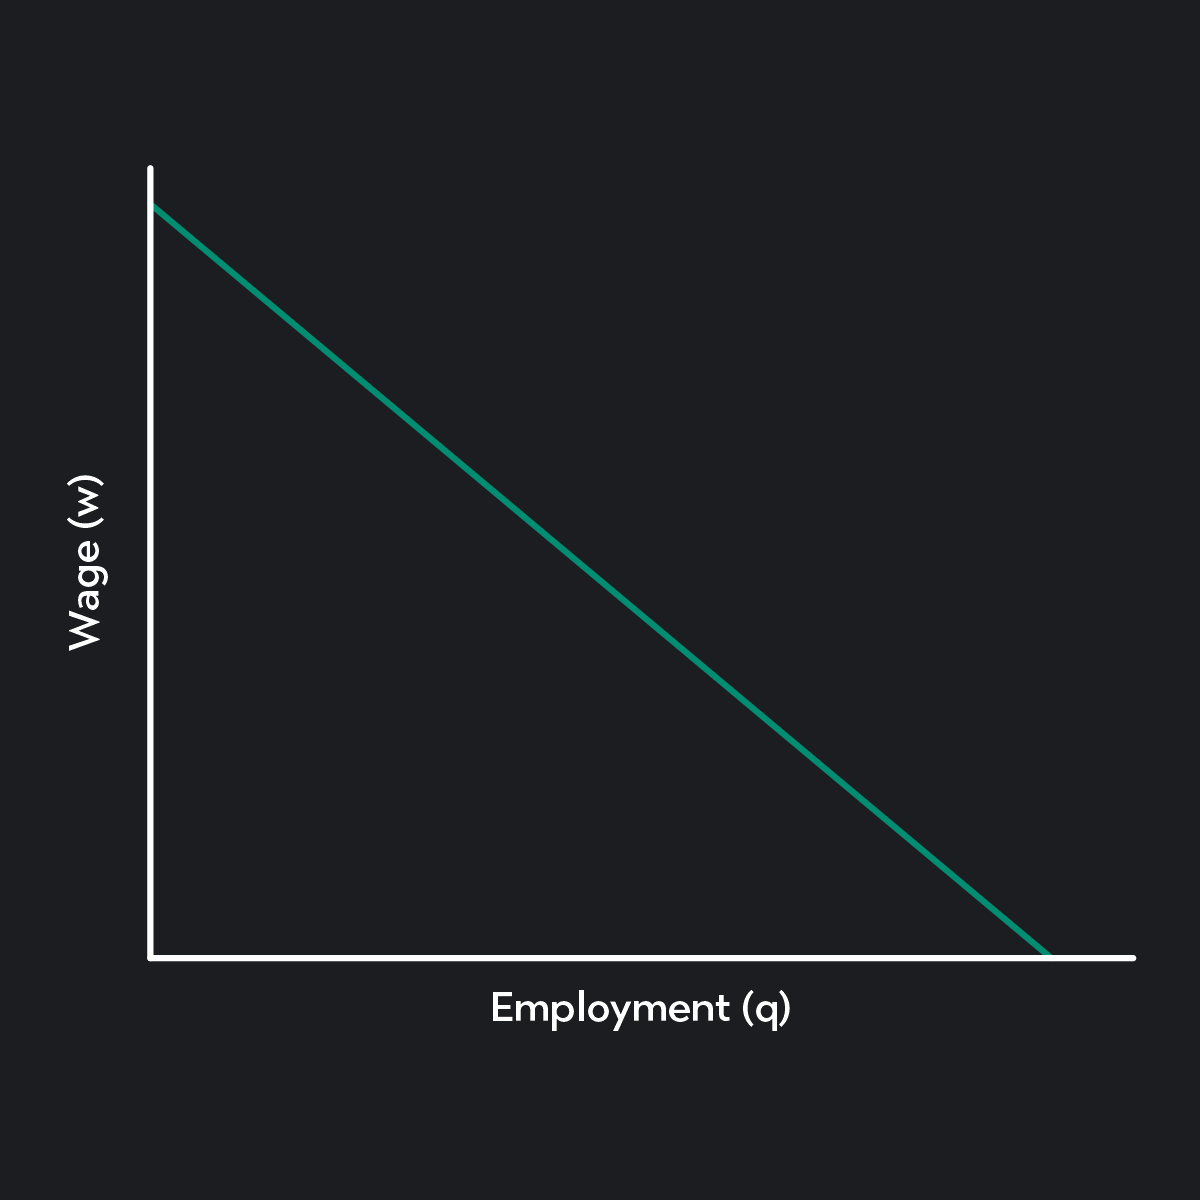 Graph showing labor demand curve is downward sloping